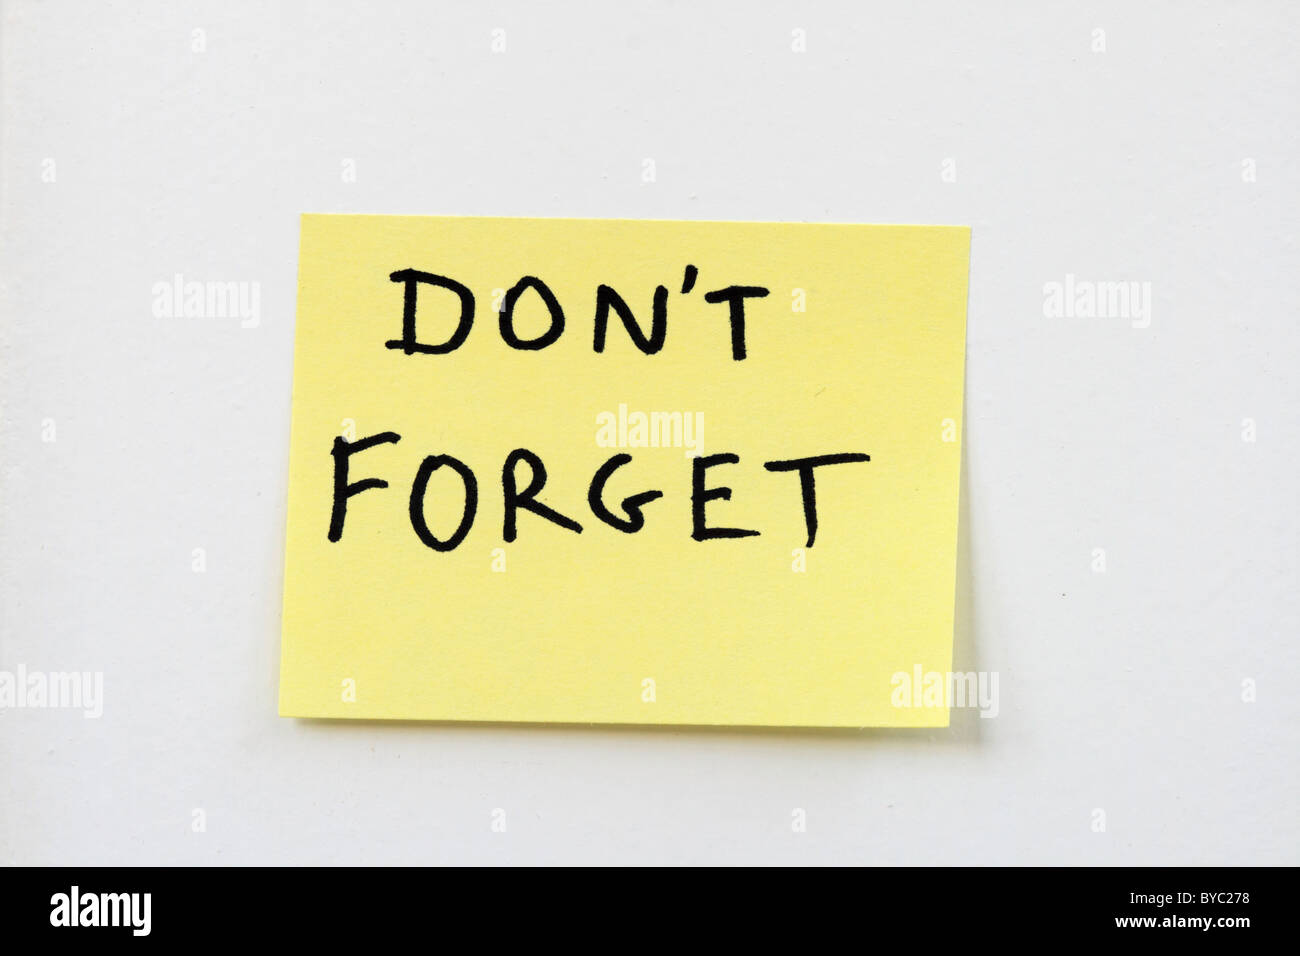 don't forget on a small yellow sticky note stuck on a white wall Stock Photo